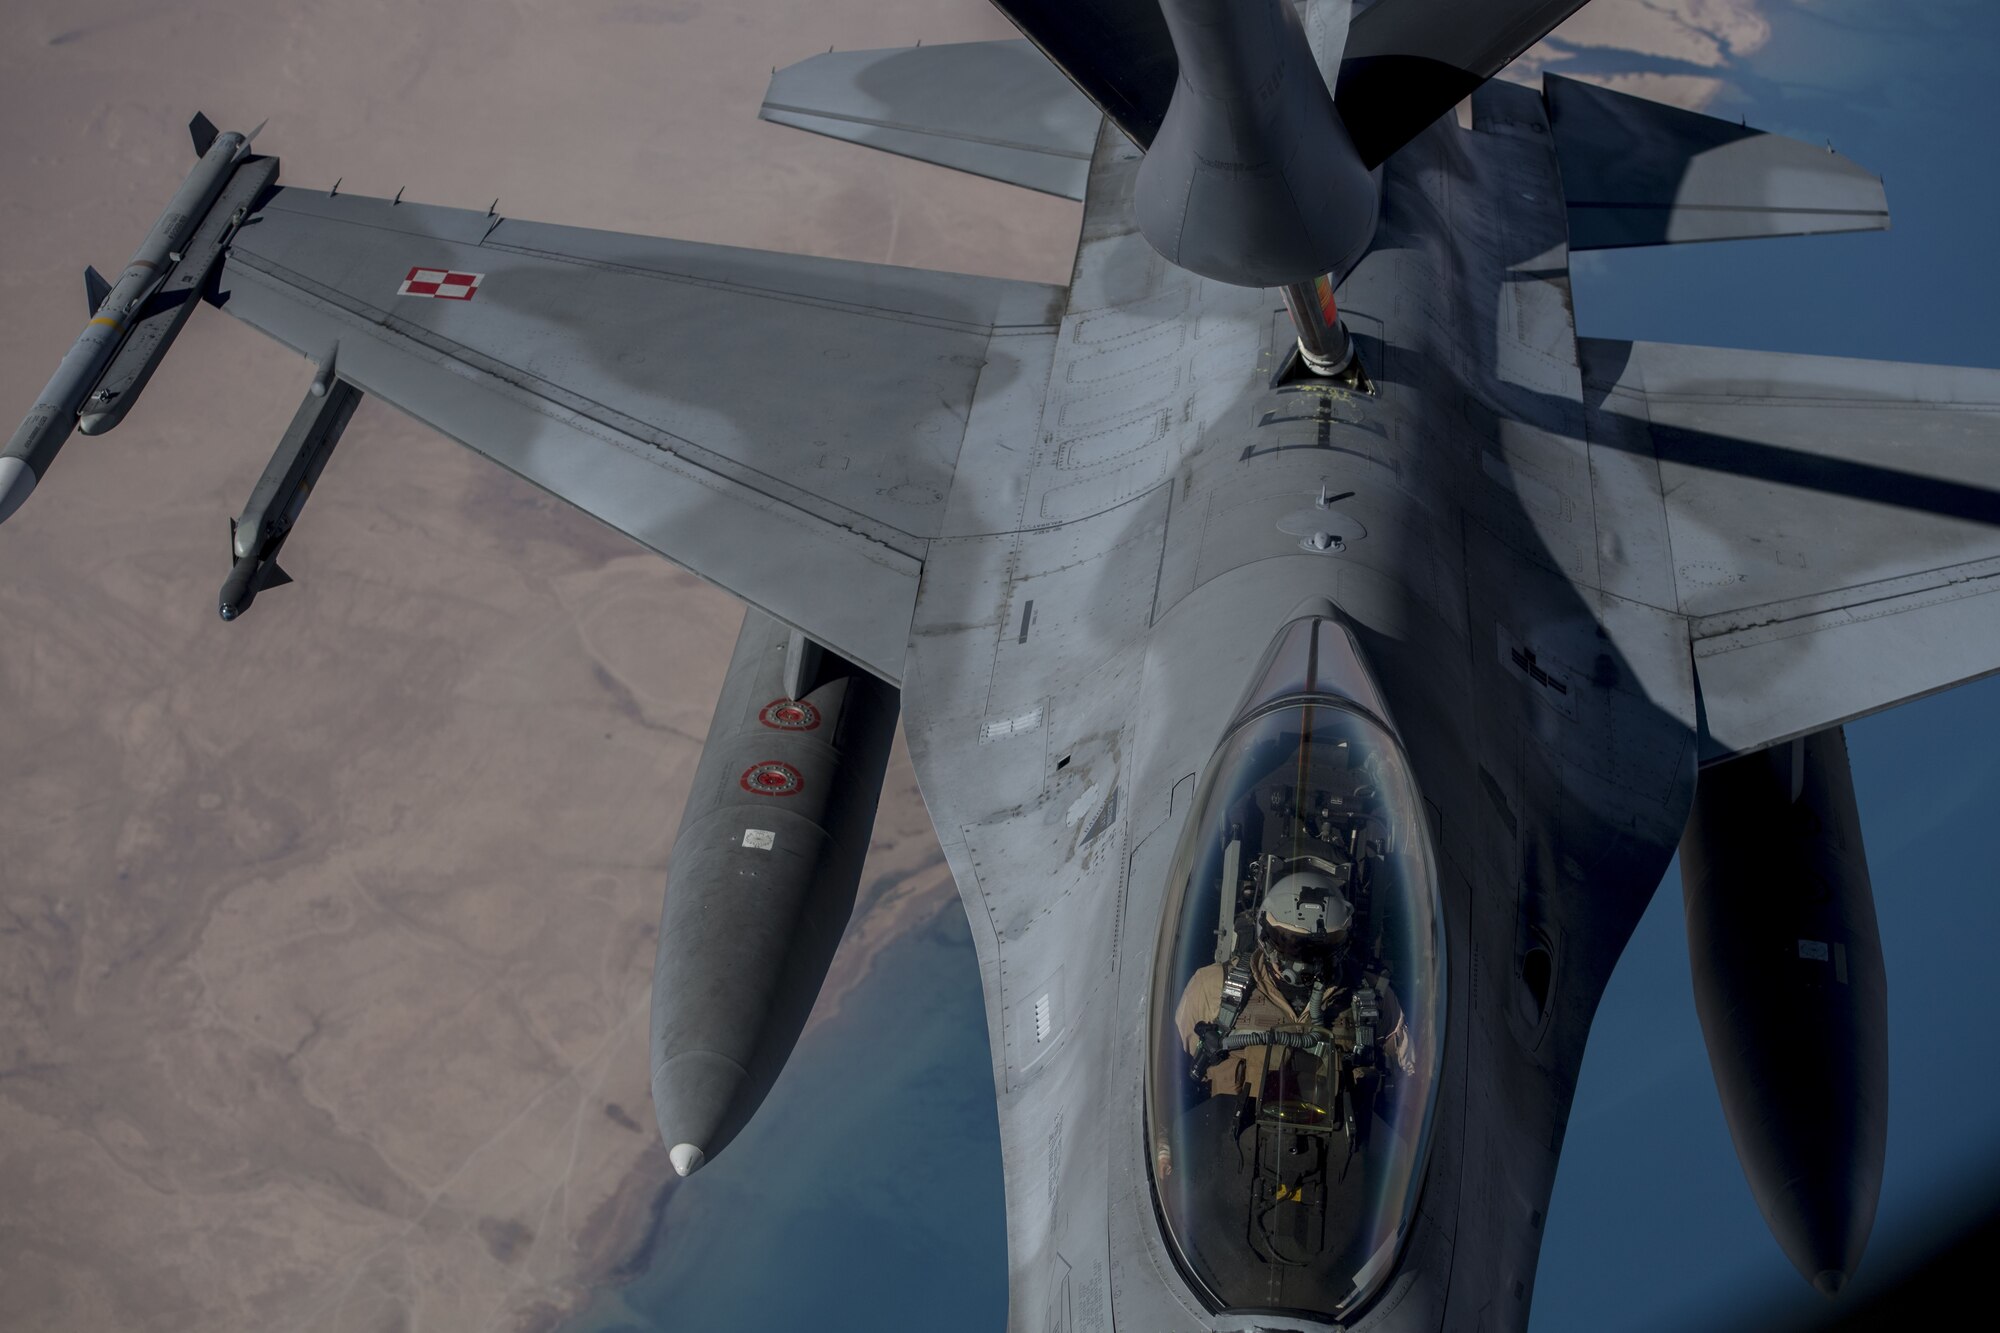 A Polish F-16 Fighting Falcon pilot maneuvers his aircraft into position to receive fuel from a KC-135 Stratotanker assigned to the 447th Air Expeditionary Group during a refueling mission over Syria, Dec. 1, 2017. The Polish Air Force is a military branch of the Polish Armed Forces, as of 2014 it consisted of around 16,425 military personnel and around 475 aircraft distributed among 10 bases throughout Poland. (U.S. Air Force photo by Staff Sgt. Paul Labbe)